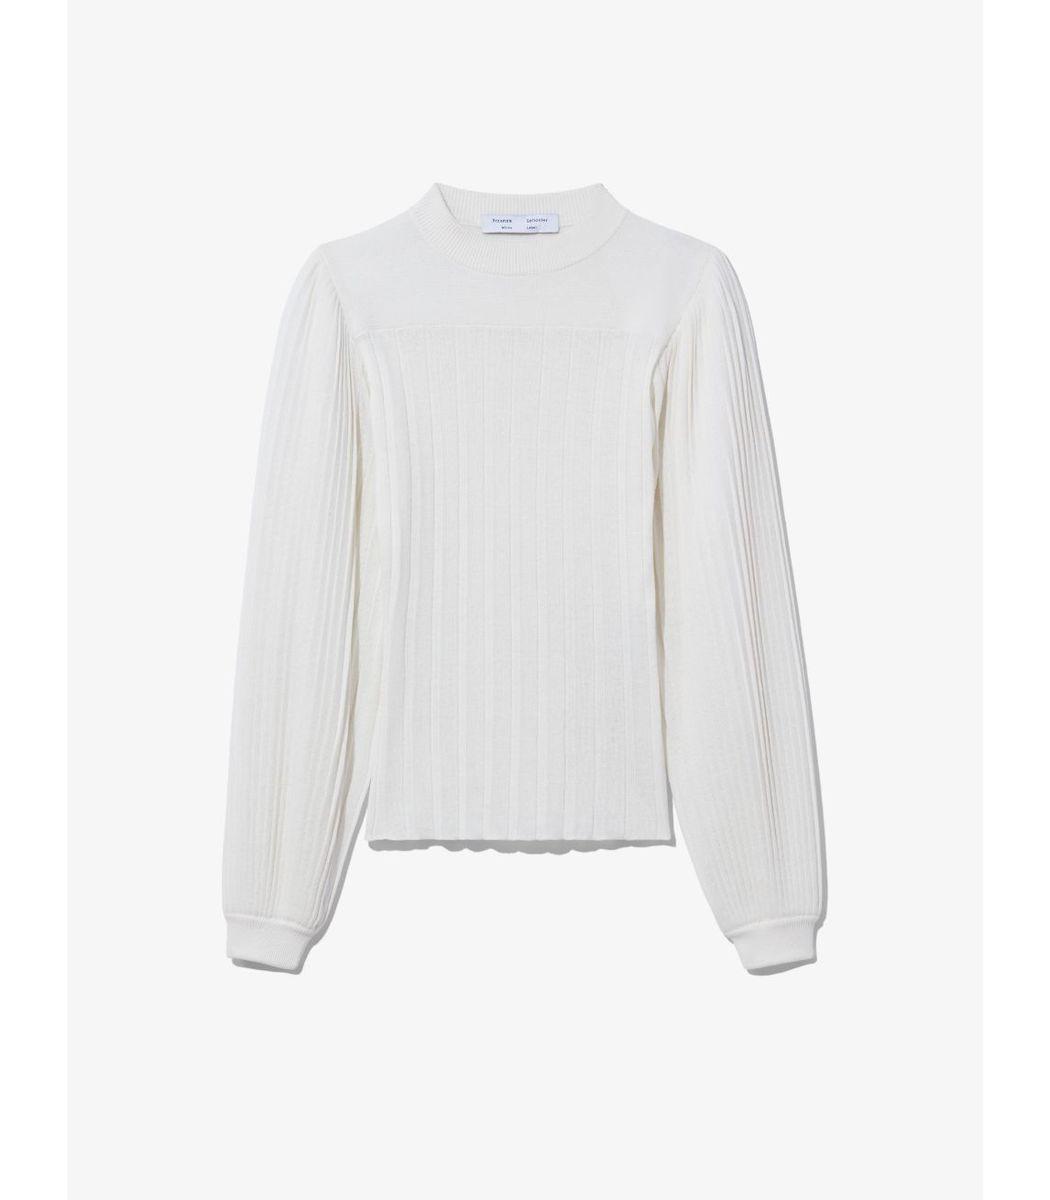 PROENZA SCHOULER WHITE LABEL Linen Knife Pleated Knit Top in White - Lyst